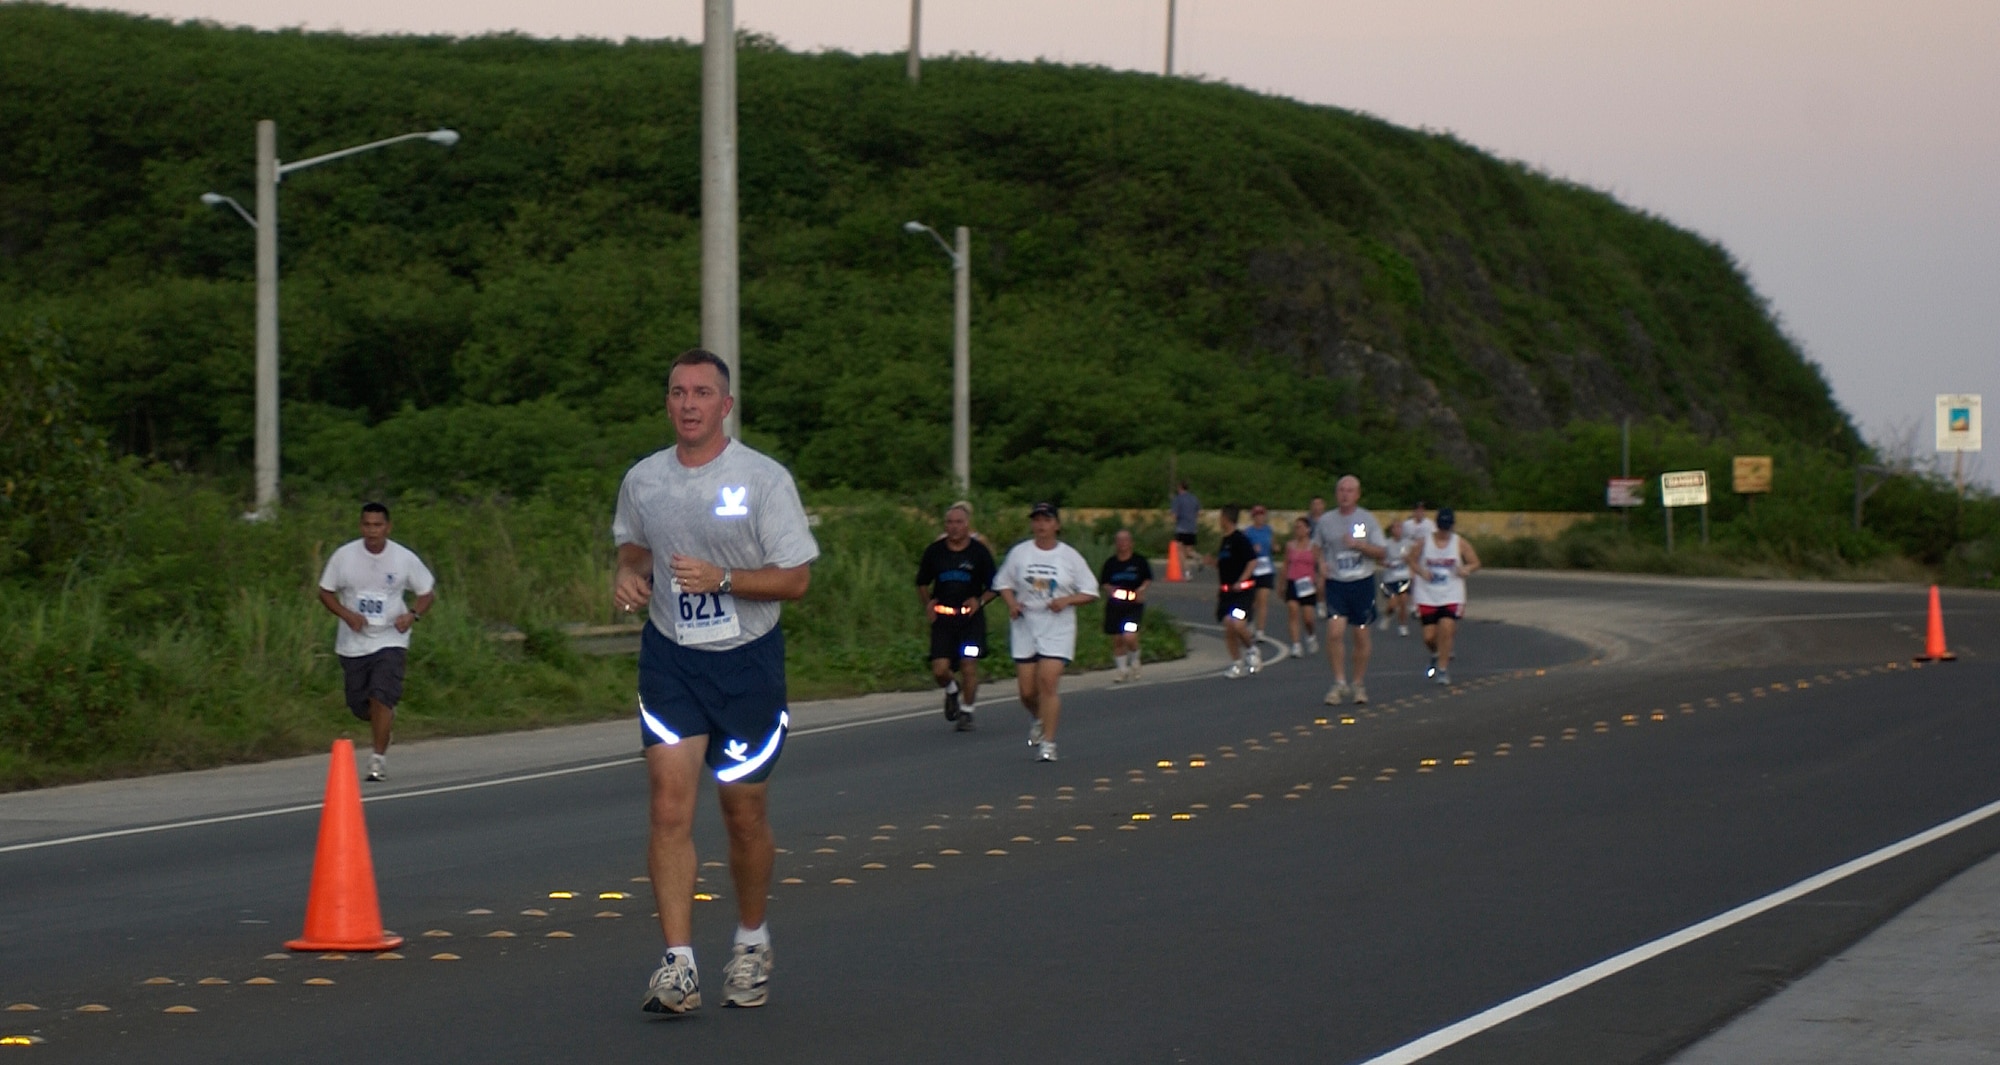 Approximately 1,000 people participated in the 2007 United Service Organizations Run for Our Heroes 5K Run/Walk Dec. 8. The proceeds were given to the USO to provide services and programs for military members and their families.  (U.S. Air Force photo/Senior Airman Angelique Smythe)